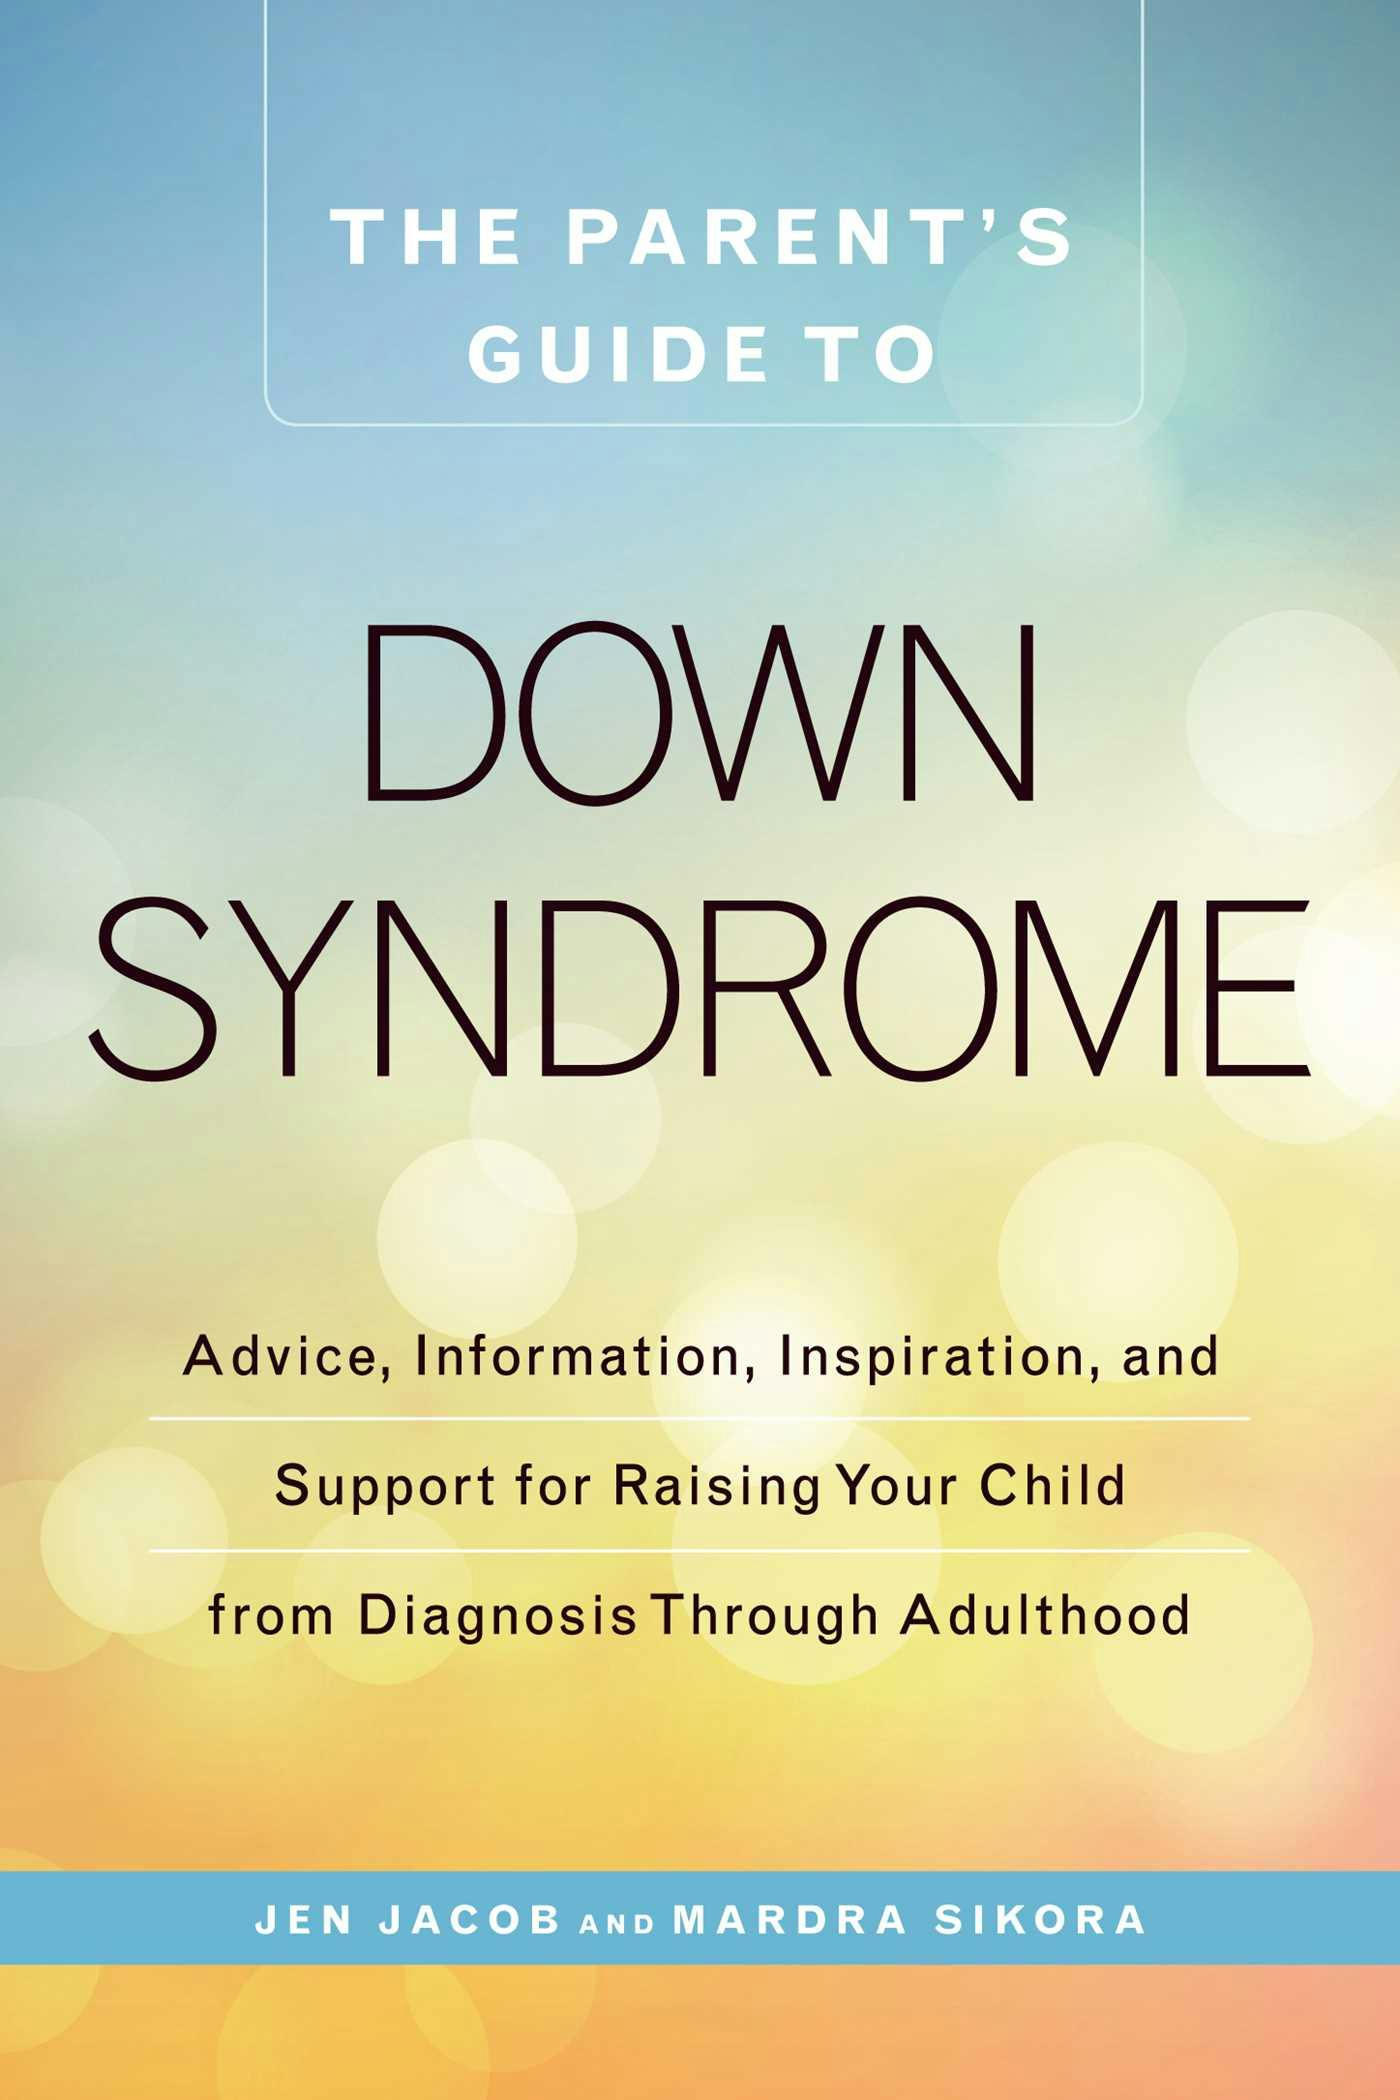 The Parent's Guide to Down Syndrome: Advice, Information, Inspiration, and Support for Raising Your Child from Diagnosis through Adulthood - Jen Jacob, Mardra Sikora